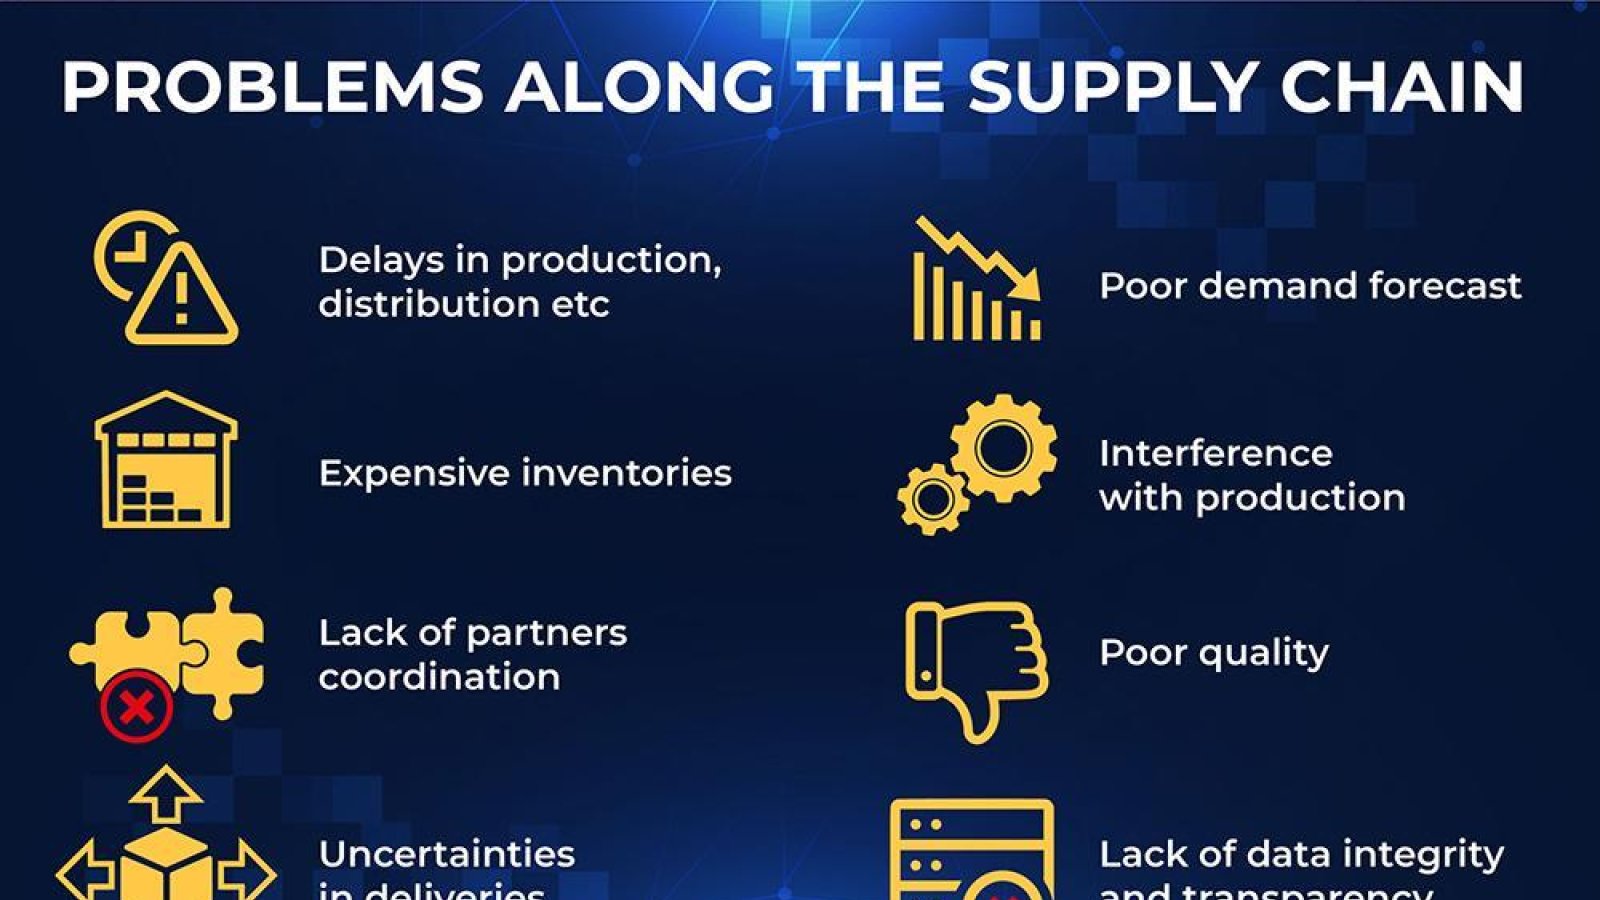 Supply chain industry has a lot of problems to deal with